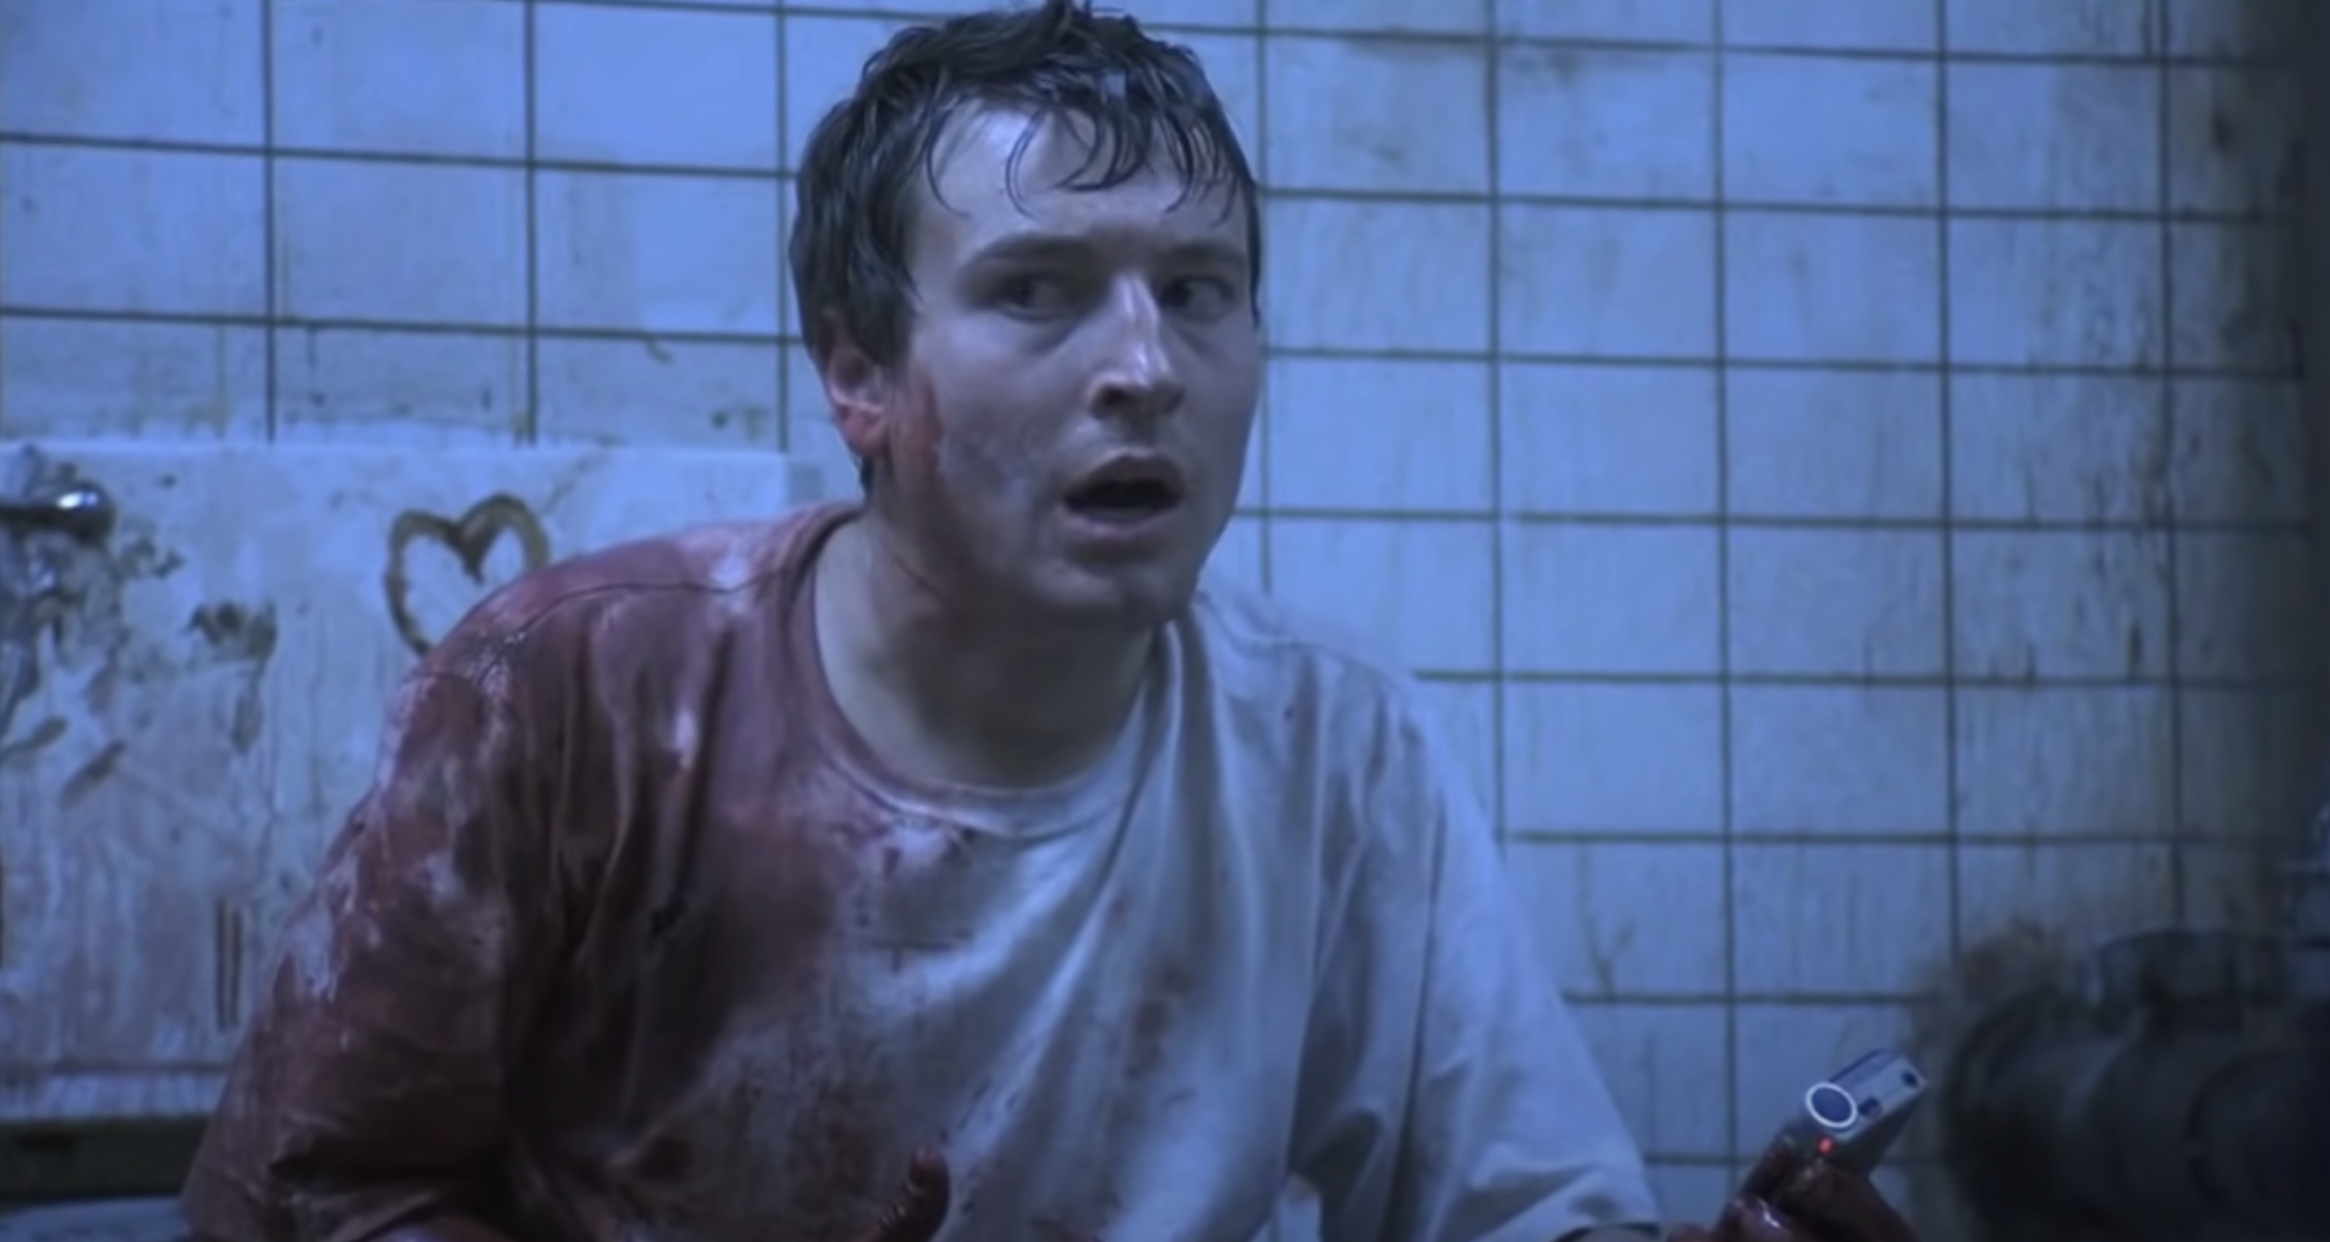 A man covered in blood looks scared and concerned while holding a tape recorder